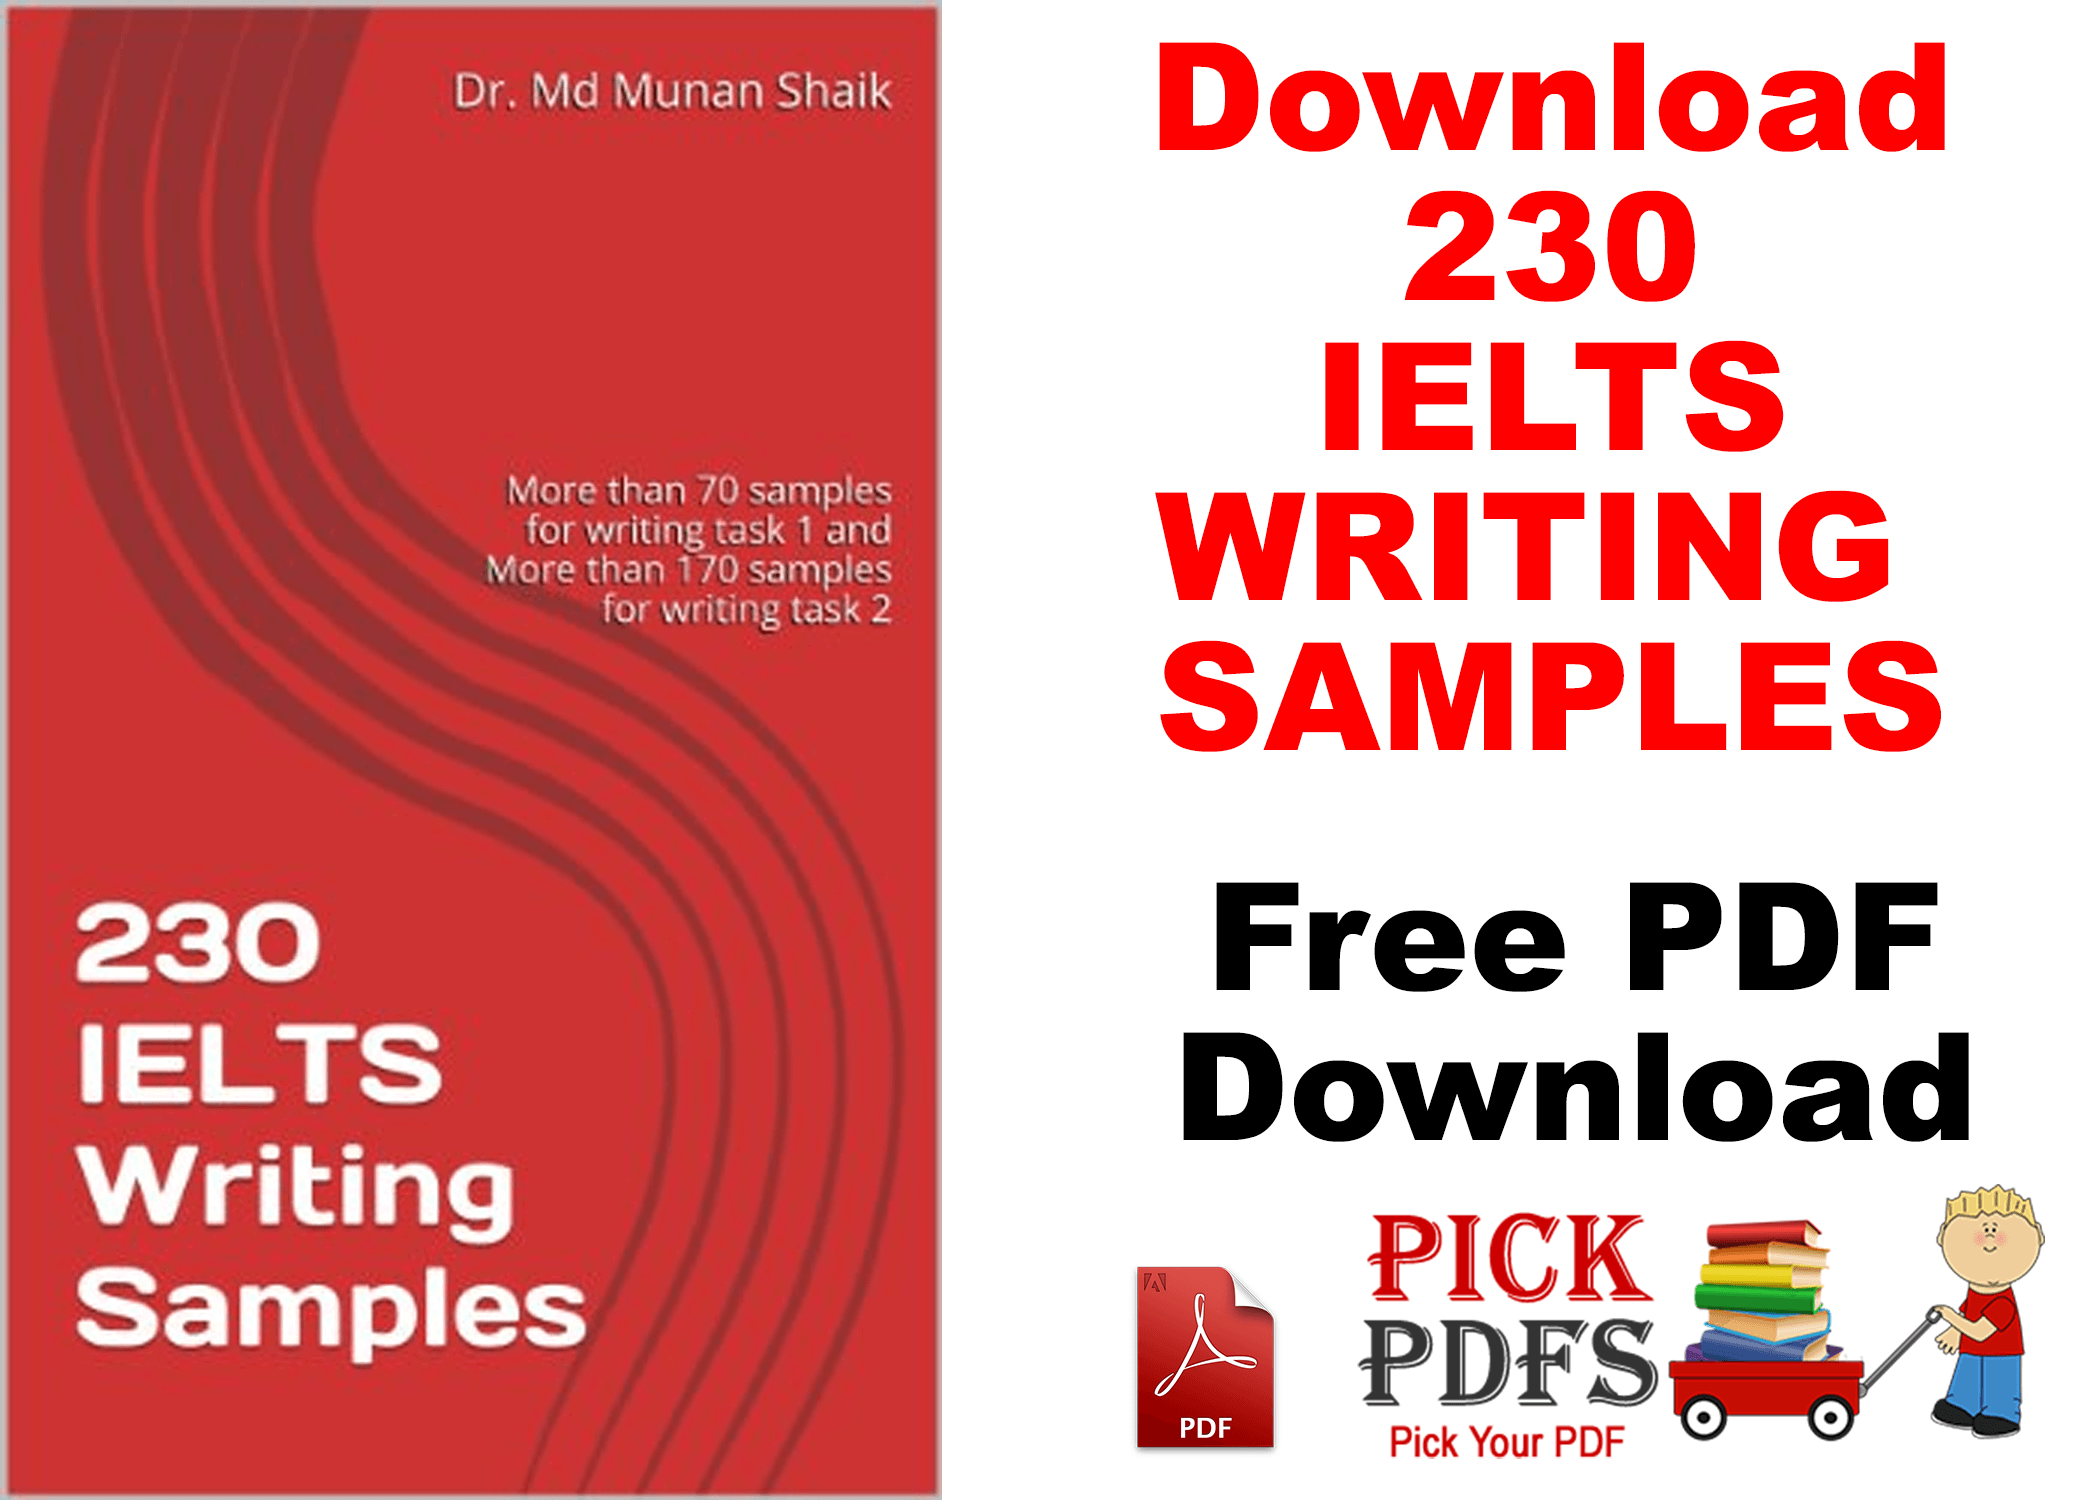 https://pickpdfs.com/prepare-for-ielts-is-a-book-of-practice-ielts-exams10-download-free-pdf/